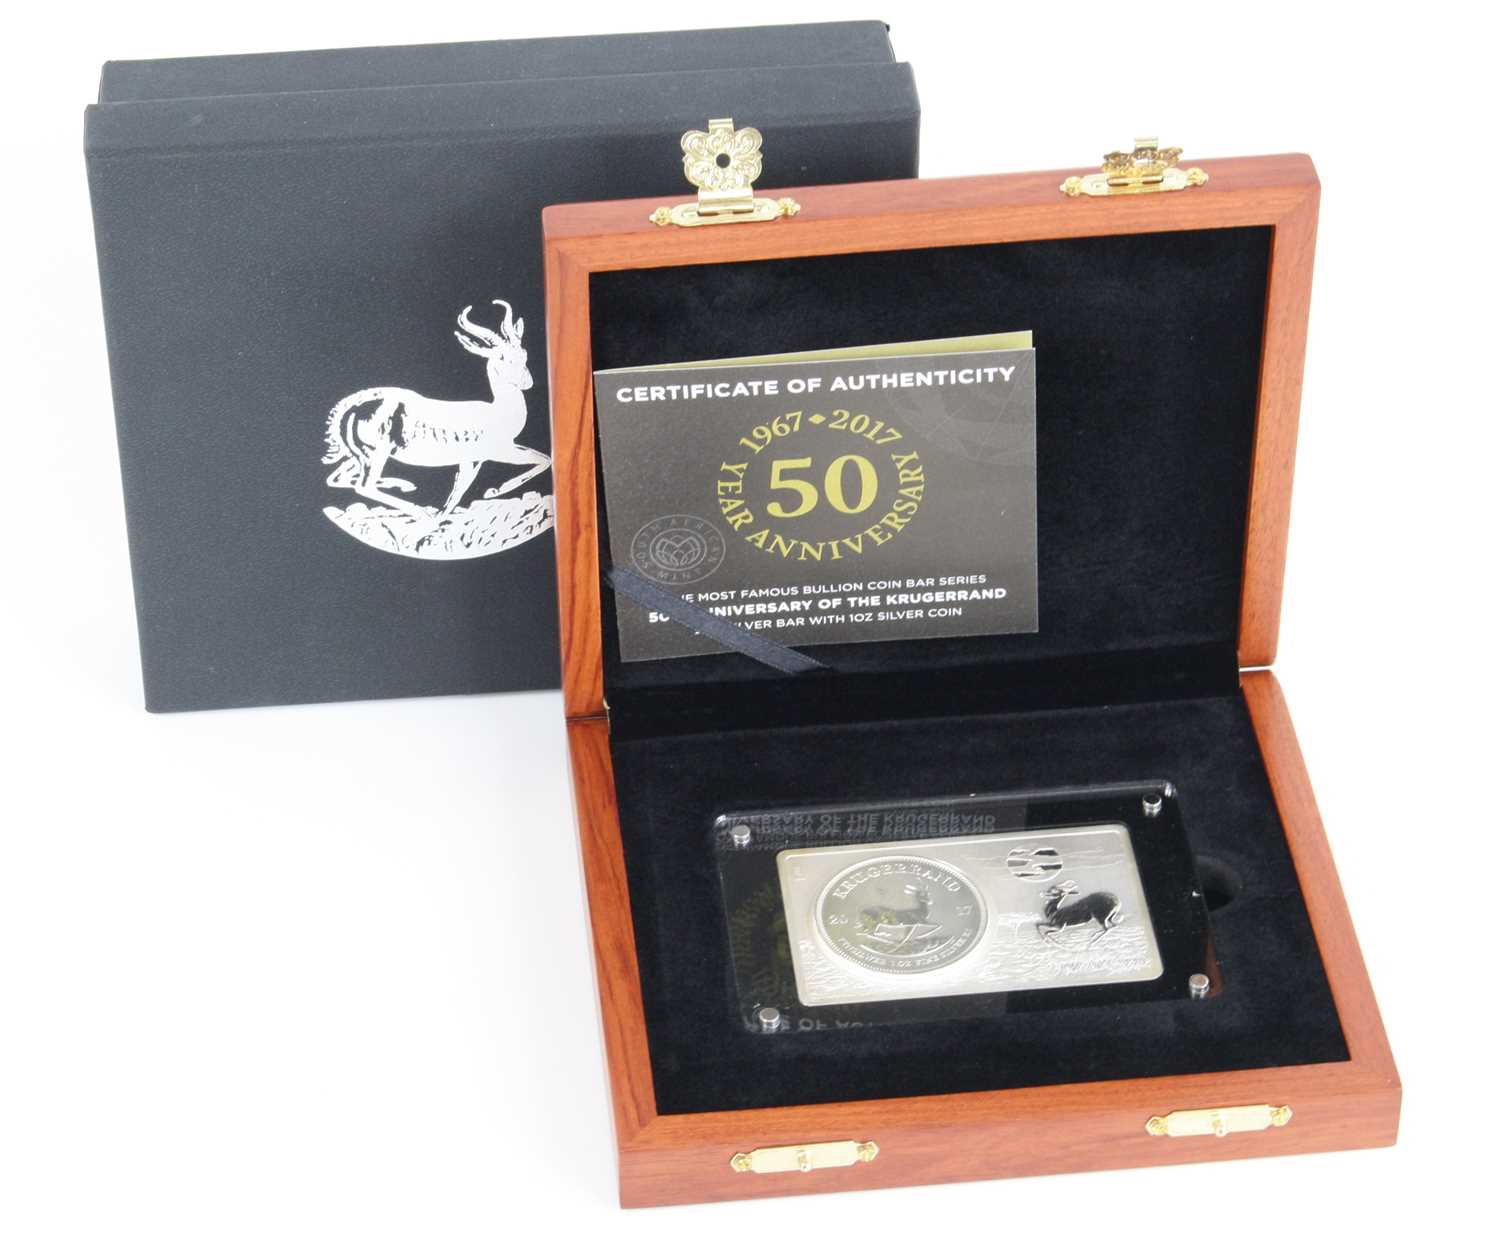 South African Mint, 1967-2017 50th Anniversary of the Krugerrand Silver Bullion Coin Bar, a 1 oz